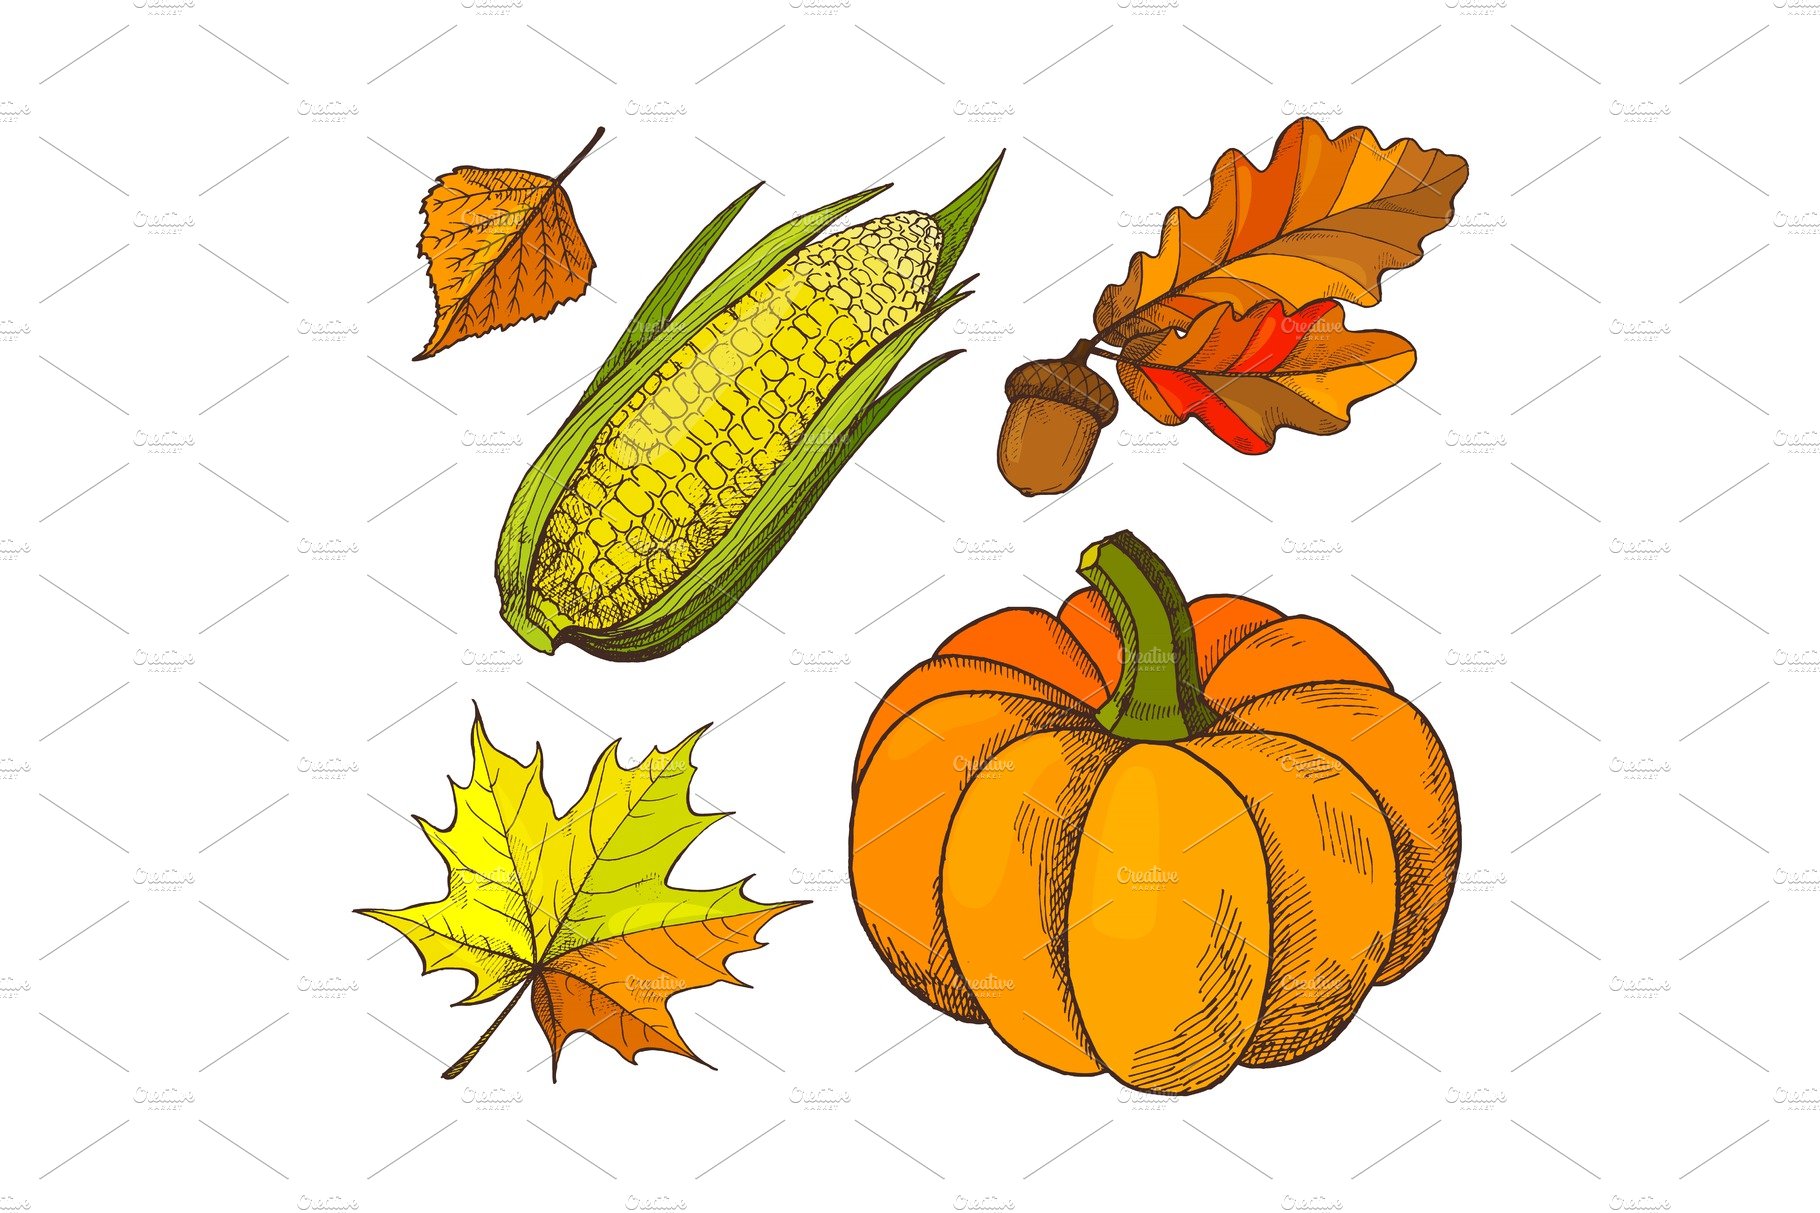 Pumpkin and Acorns Autumn Isolated cover image.